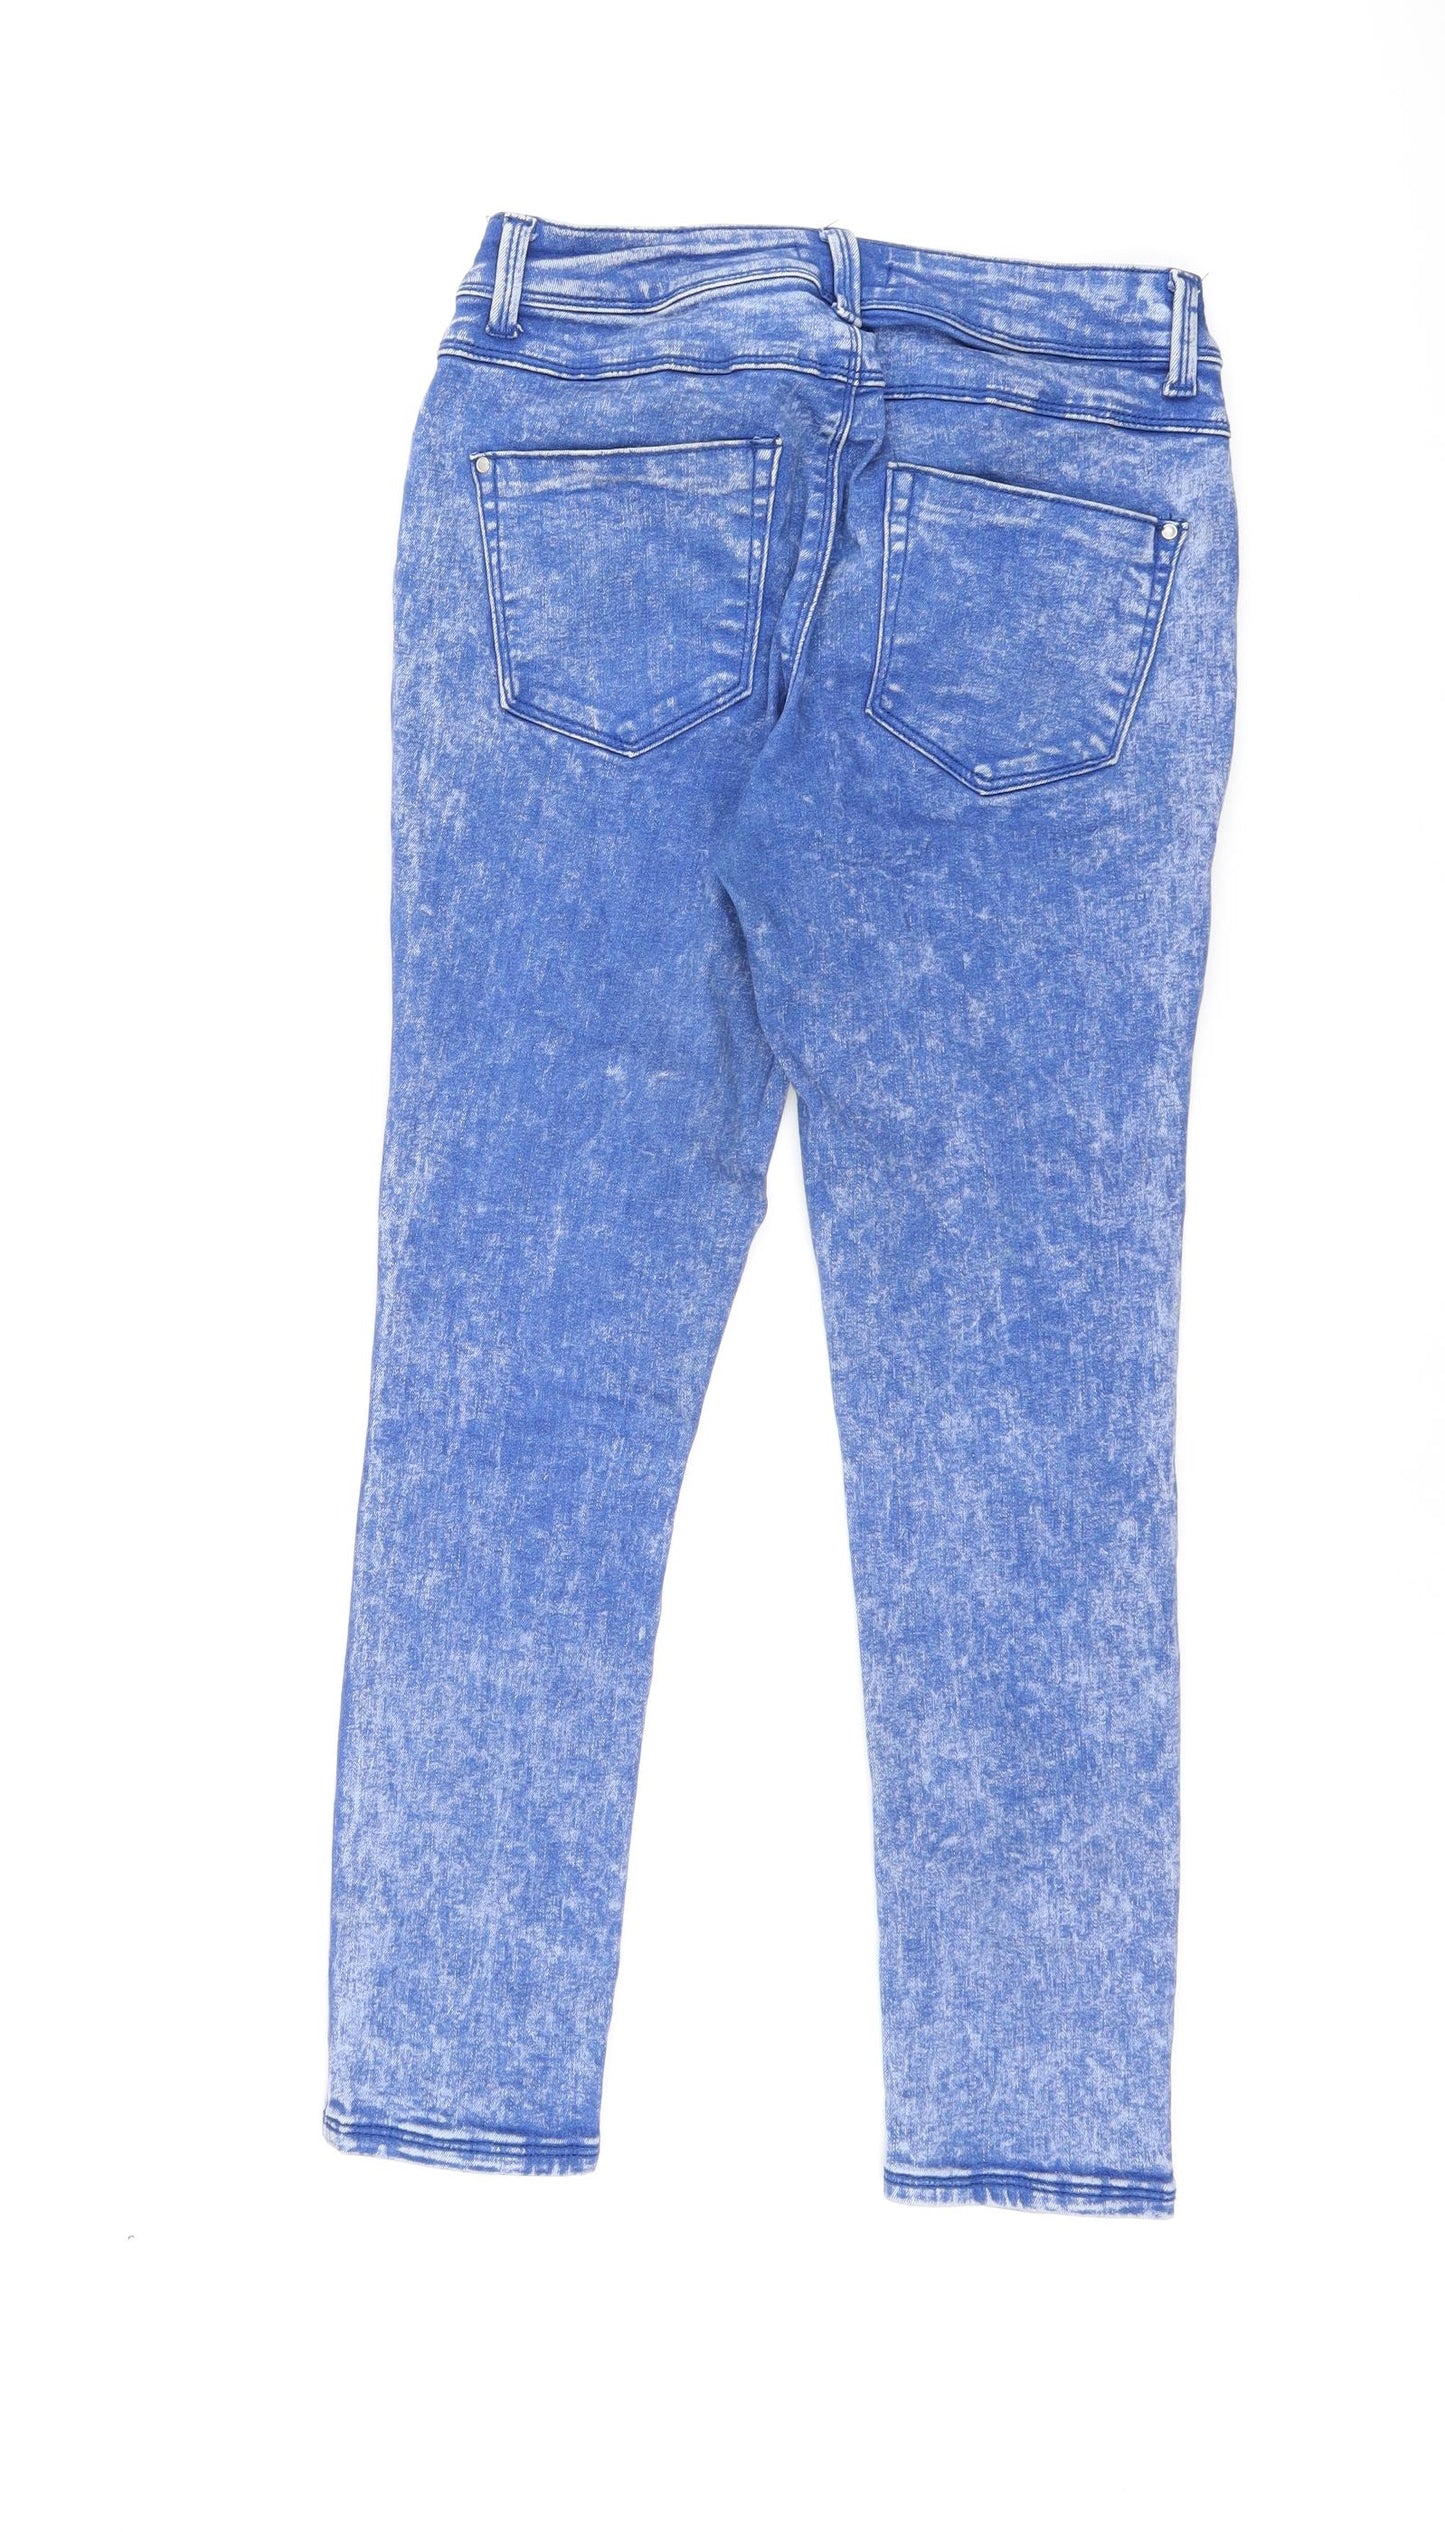 New Look Womens Blue Cotton Skinny Jeans Size 10 L24.5 in Regular Zip - Acid Wash Distressing